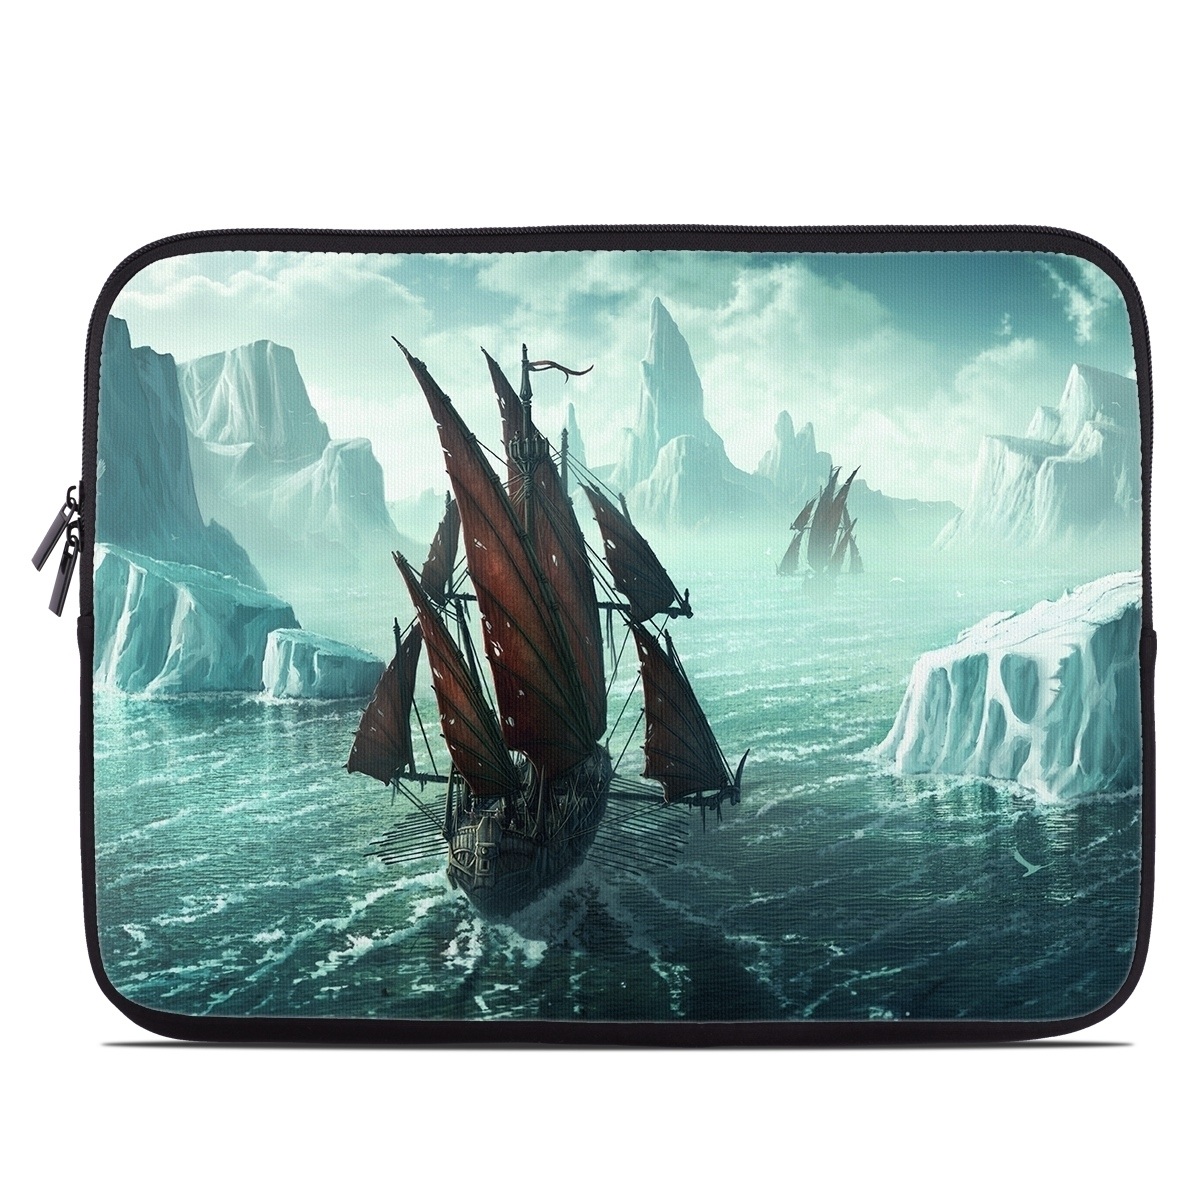 Laptop Sleeve - Into the Unknown (Image 1)